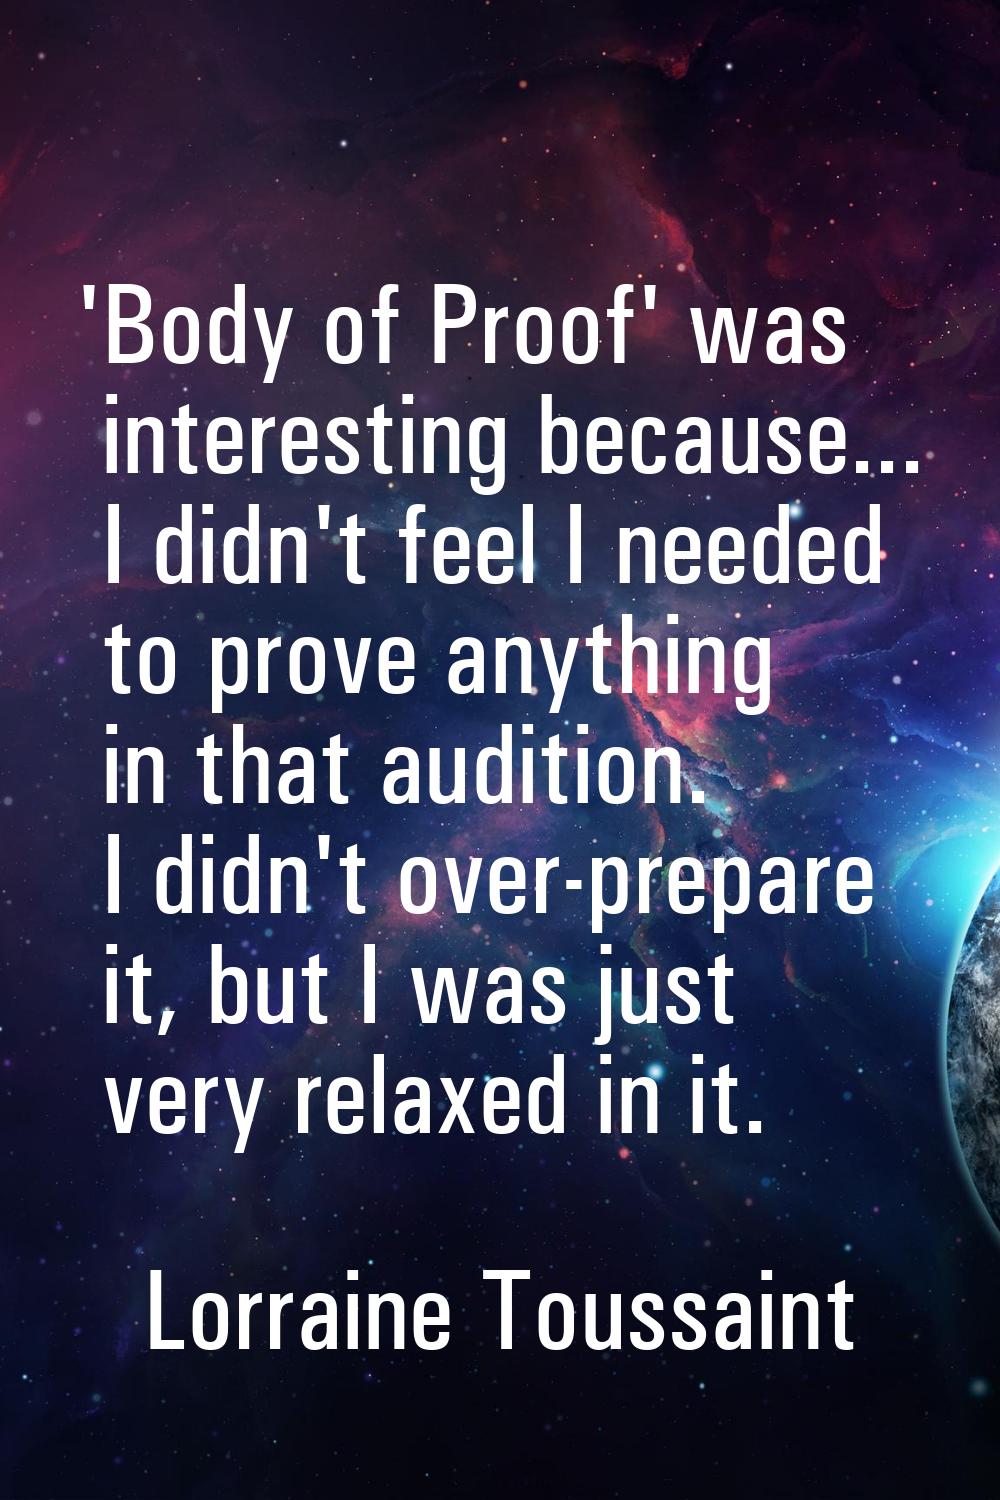 'Body of Proof' was interesting because... I didn't feel I needed to prove anything in that auditio